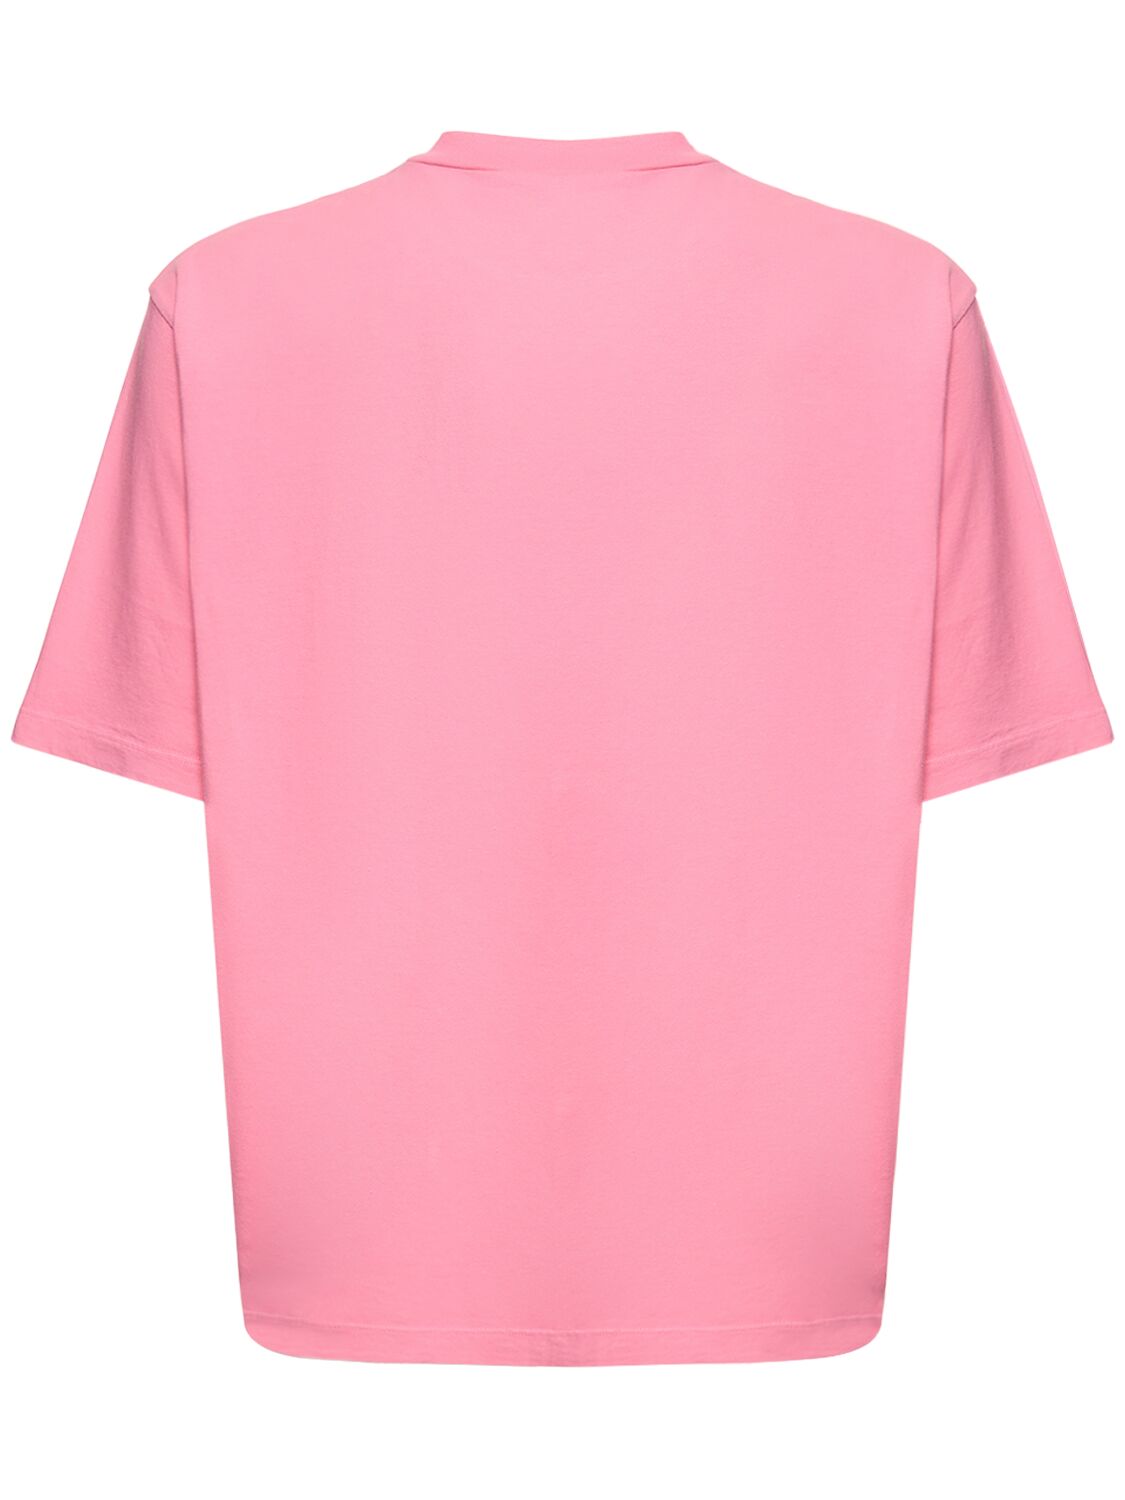 Shop Dsquared2 Loose Fit Printed Cotton T-shirt In Rosa